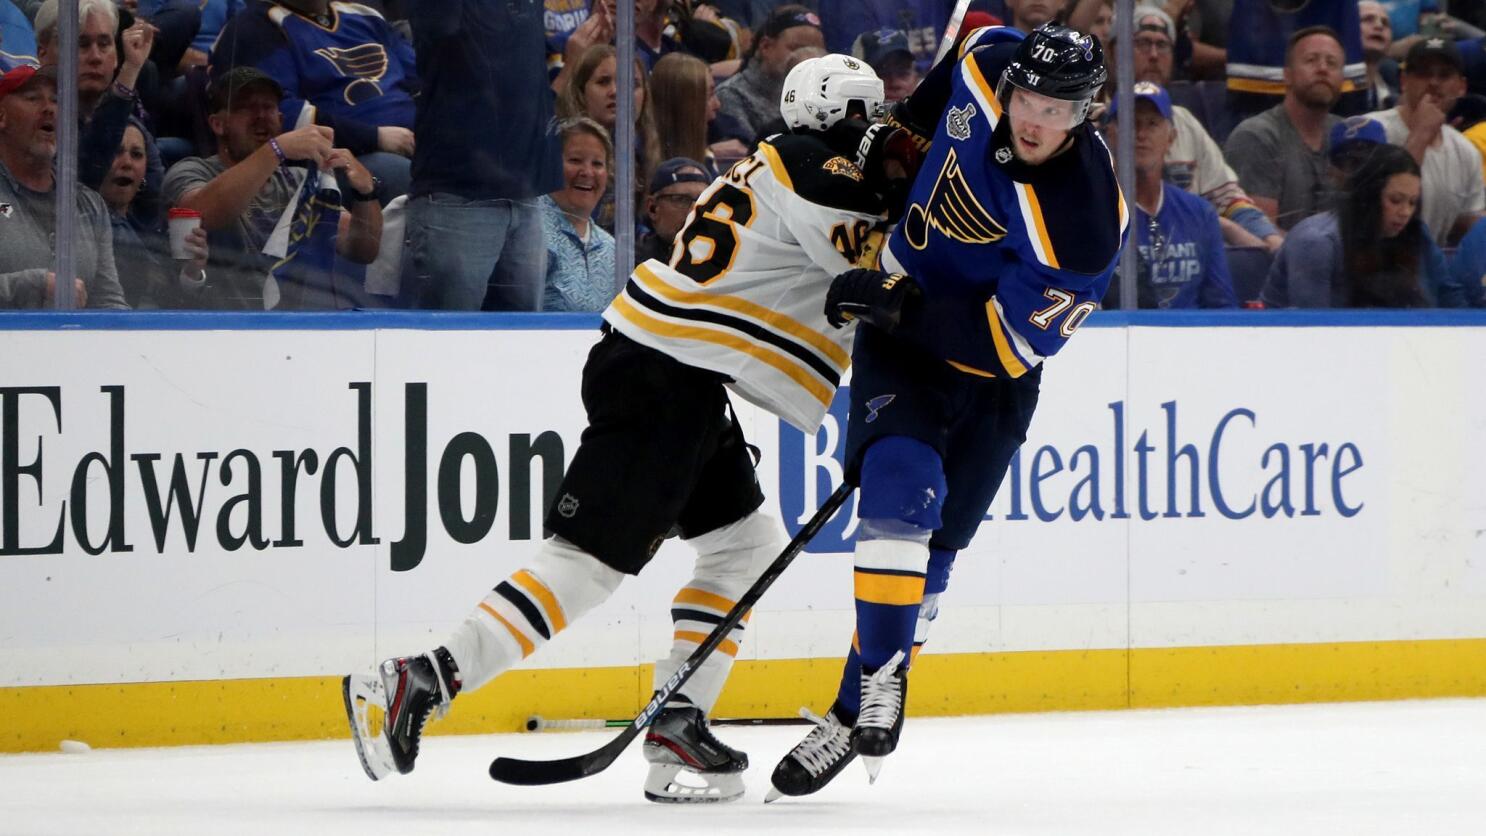 With Chara hurt, Bruins need help on D in Stanley Cup Game 5